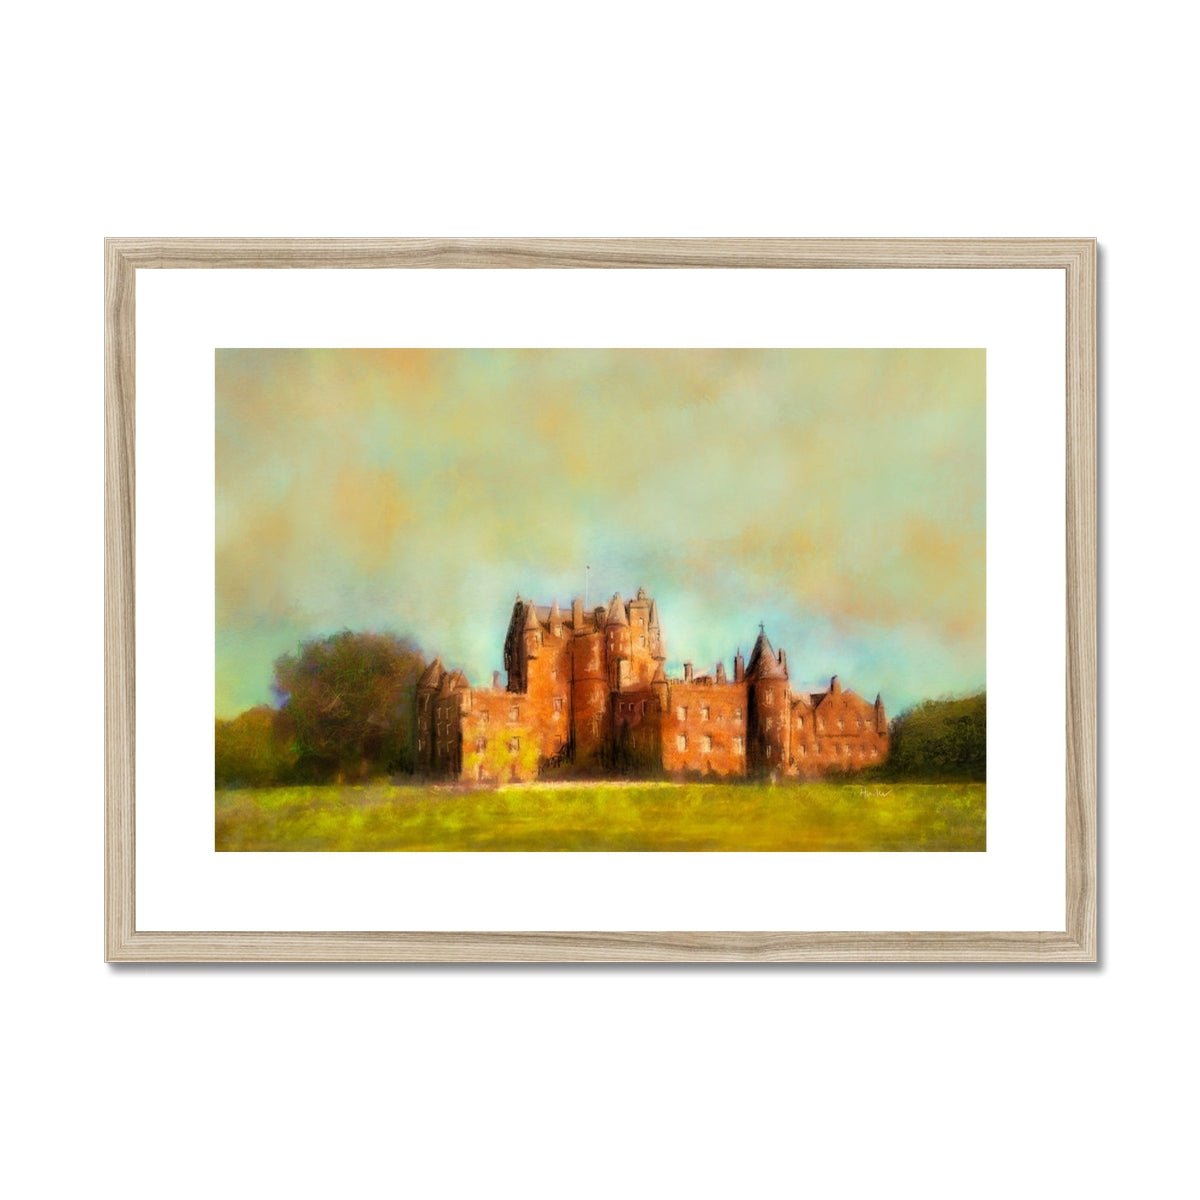 Glamis Castle Painting | Framed & Mounted Prints From Scotland-Framed & Mounted Prints-Historic & Iconic Scotland Art Gallery-A2 Landscape-Natural Frame-Paintings, Prints, Homeware, Art Gifts From Scotland By Scottish Artist Kevin Hunter